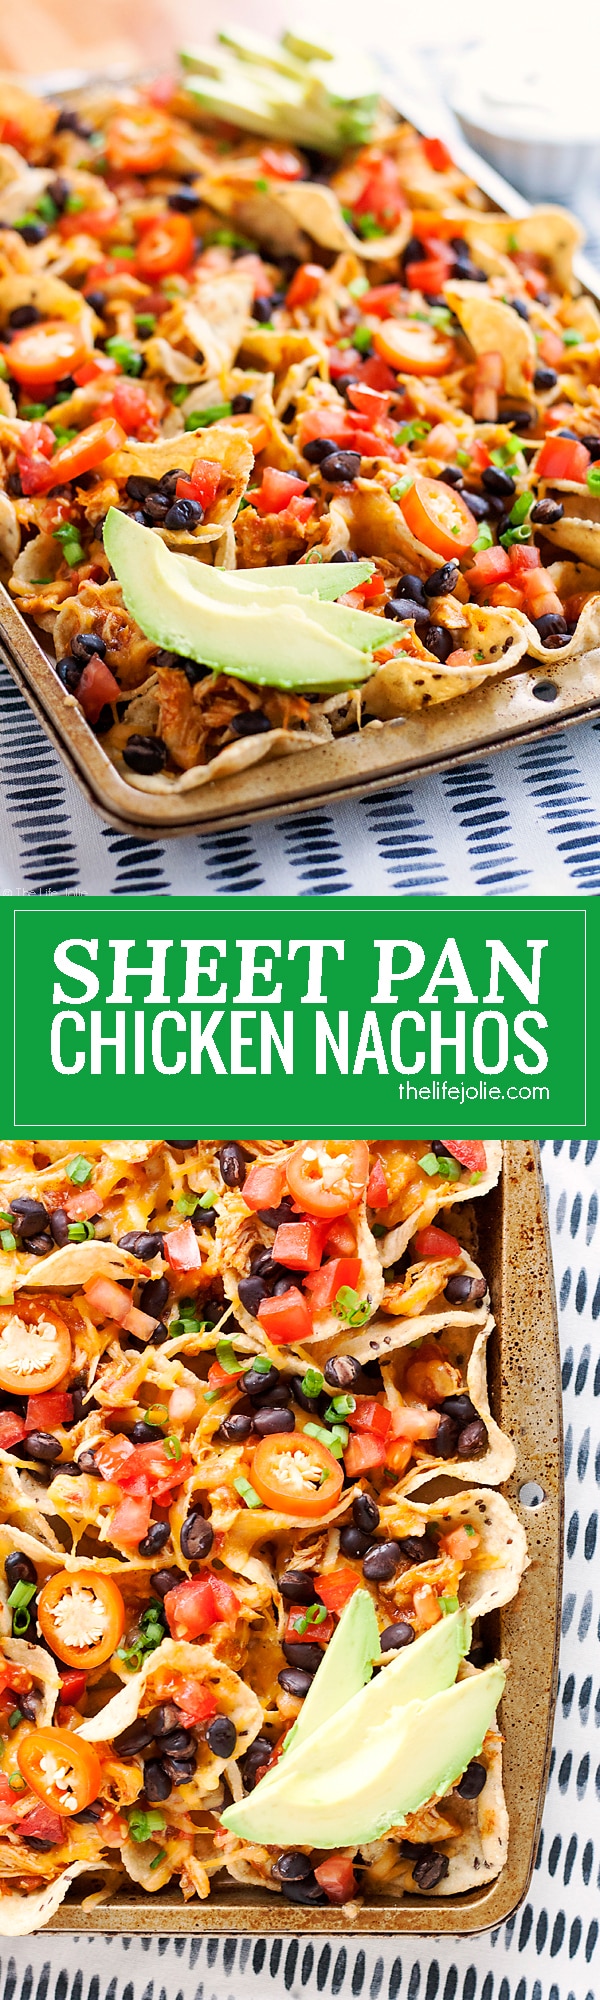 These Sheet Pan Chicken Nachos are an easy and delicious game day snack recipe! They are so simple to put together and bake up in the oven with tortilla chips, leftover taco meat, plenty of cheese and all sorts of other great toppings! You've got to try these!